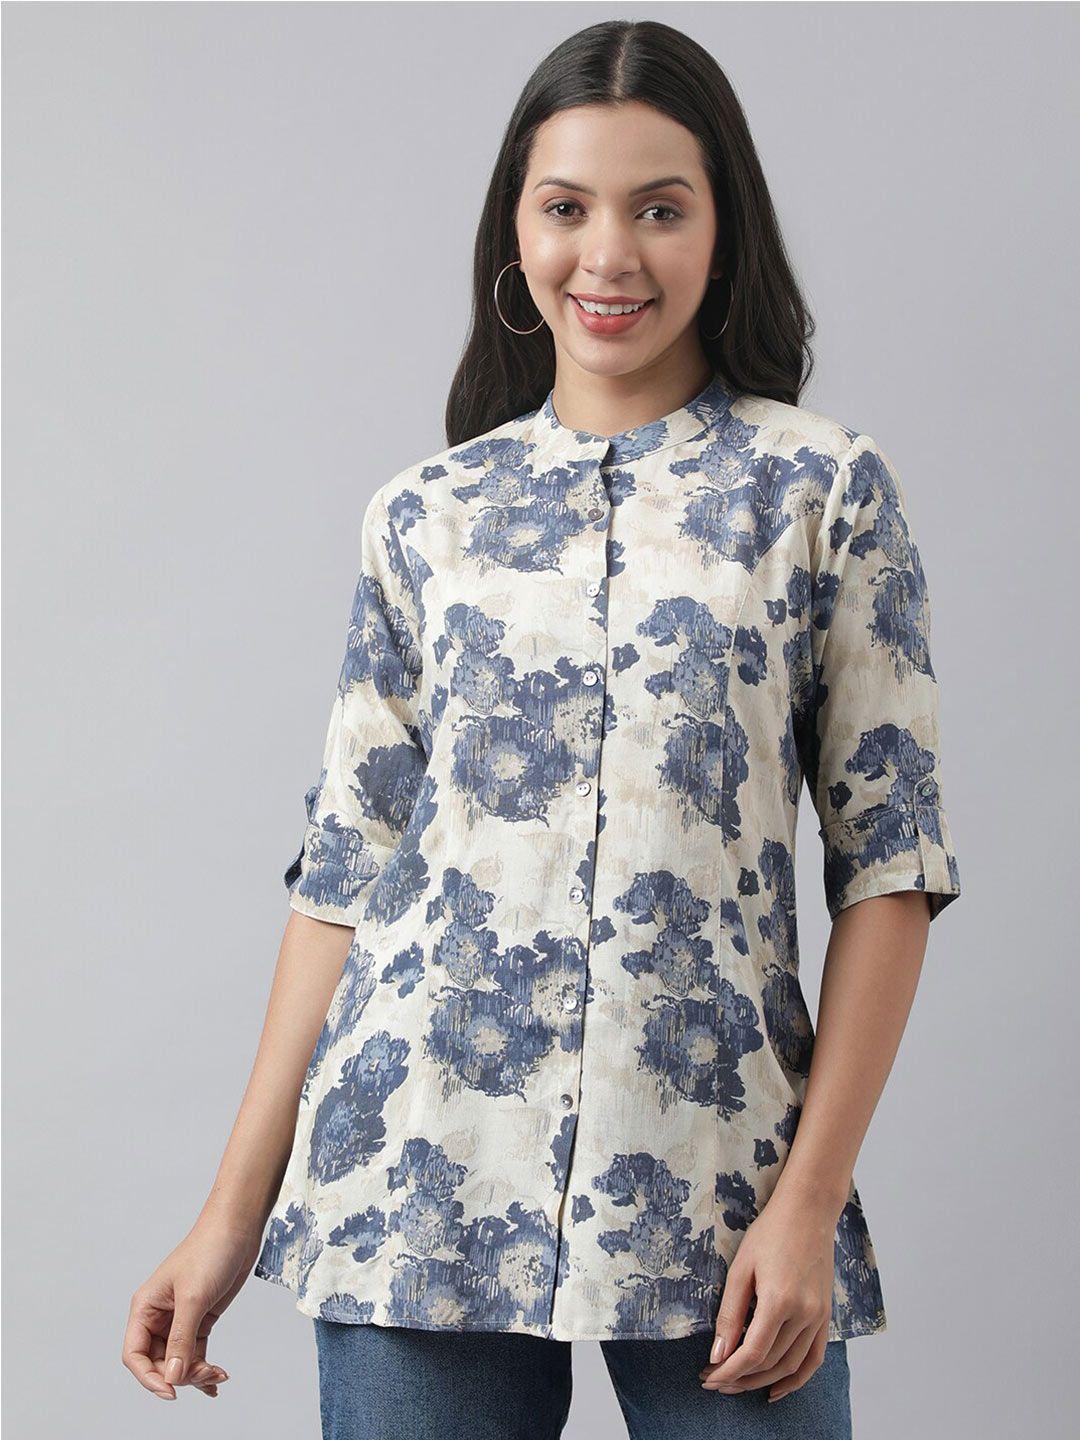 divena-abstract-printed-mandarin-collar-roll-up-sleeves-a-line-shirt-style-top